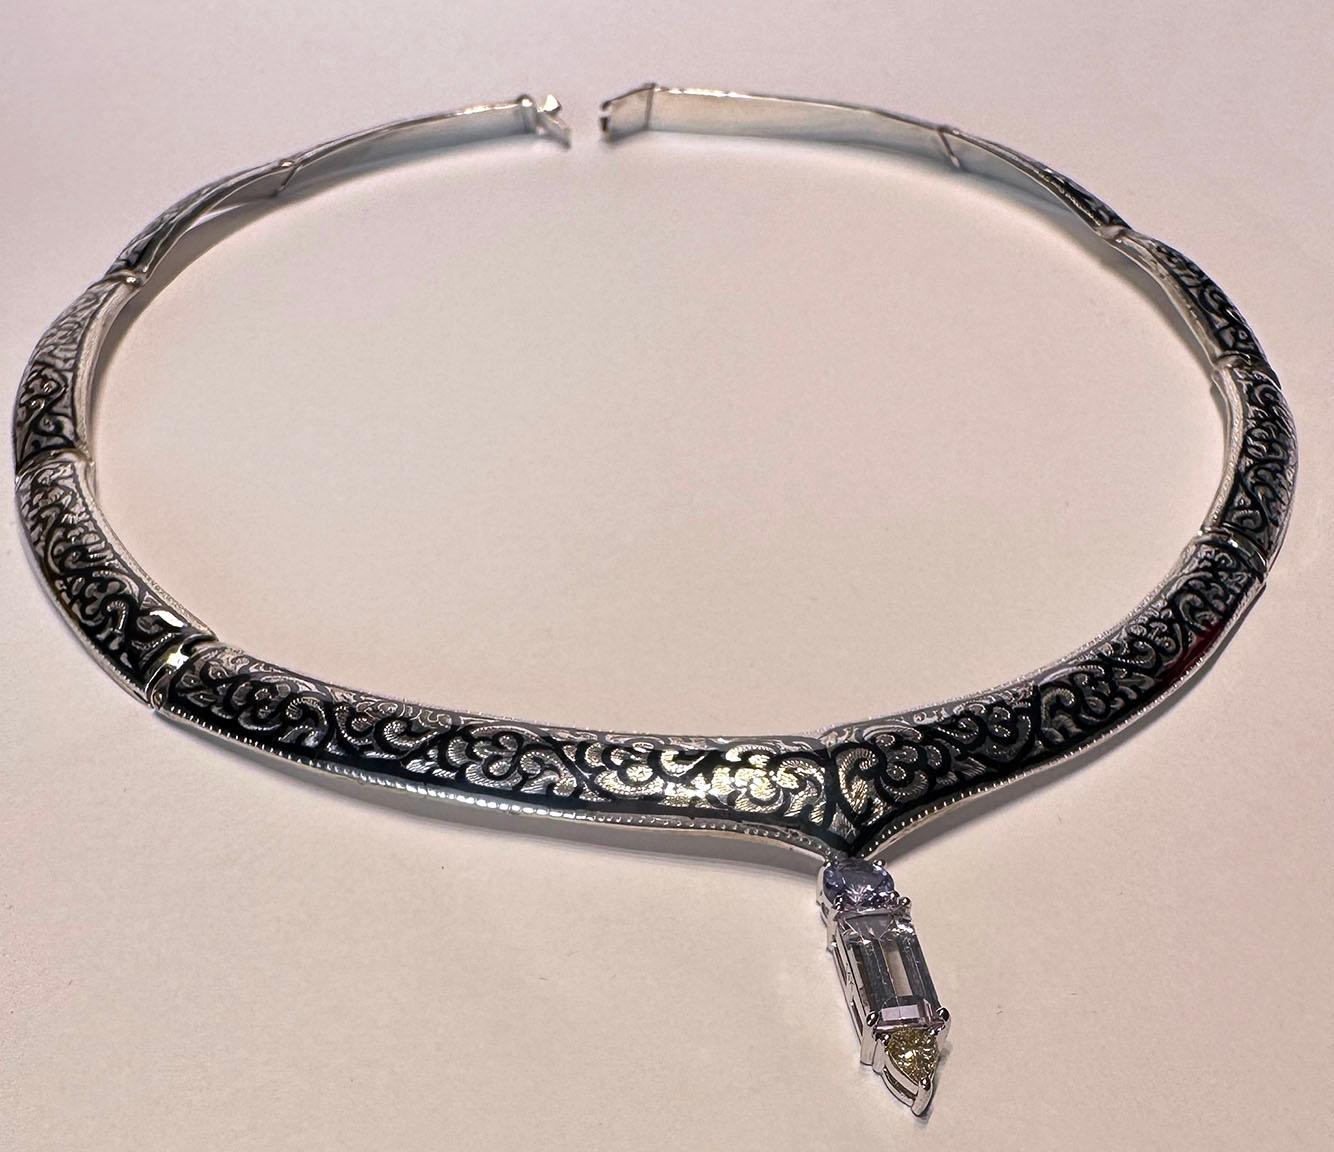 A Silver Nielloware Necklace with a removable White Gold Jeweled Pendant For Sale 1